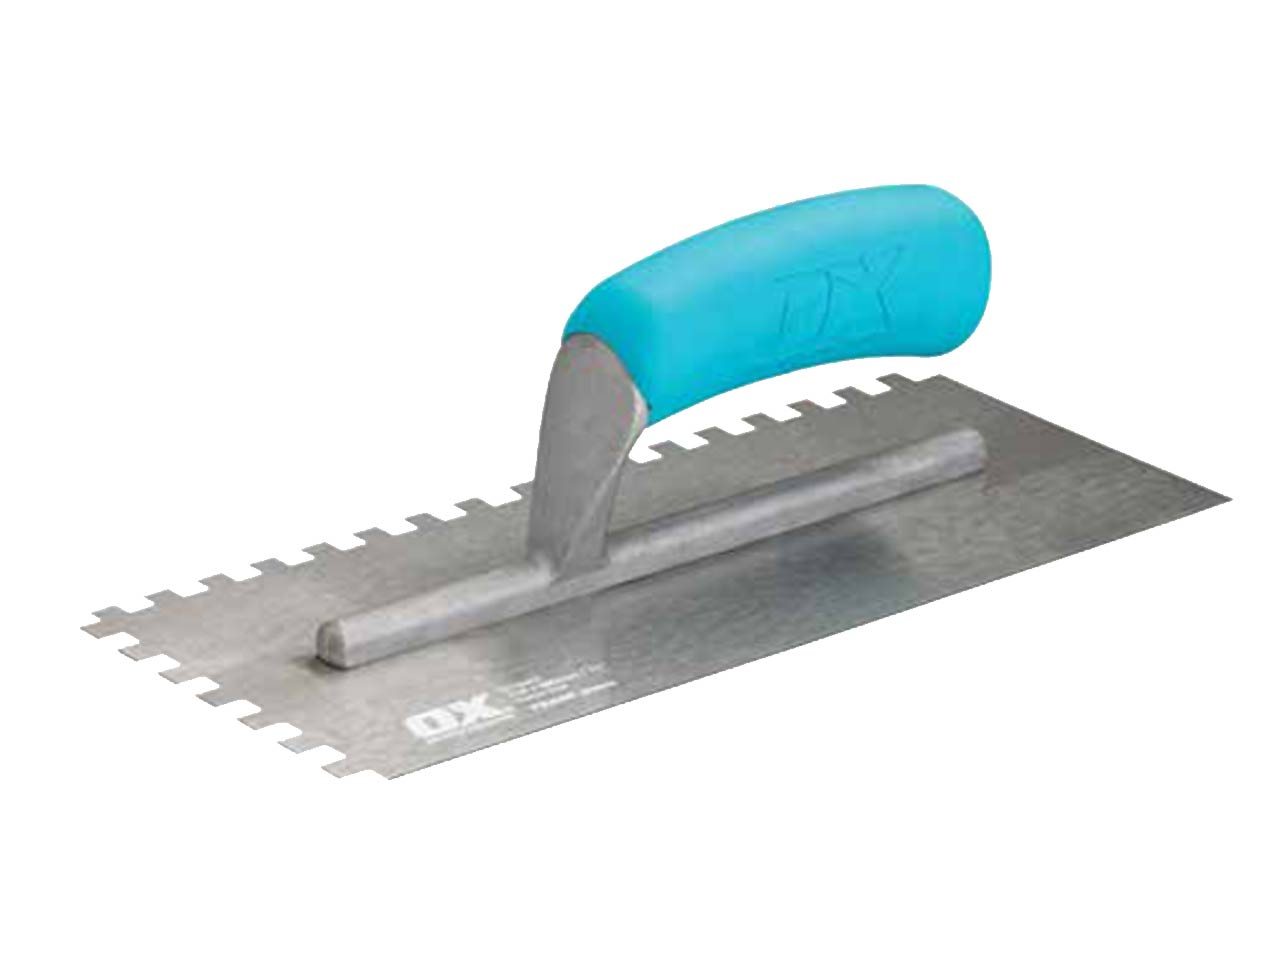 OX Trade Notched Tiling Trowel 6mm